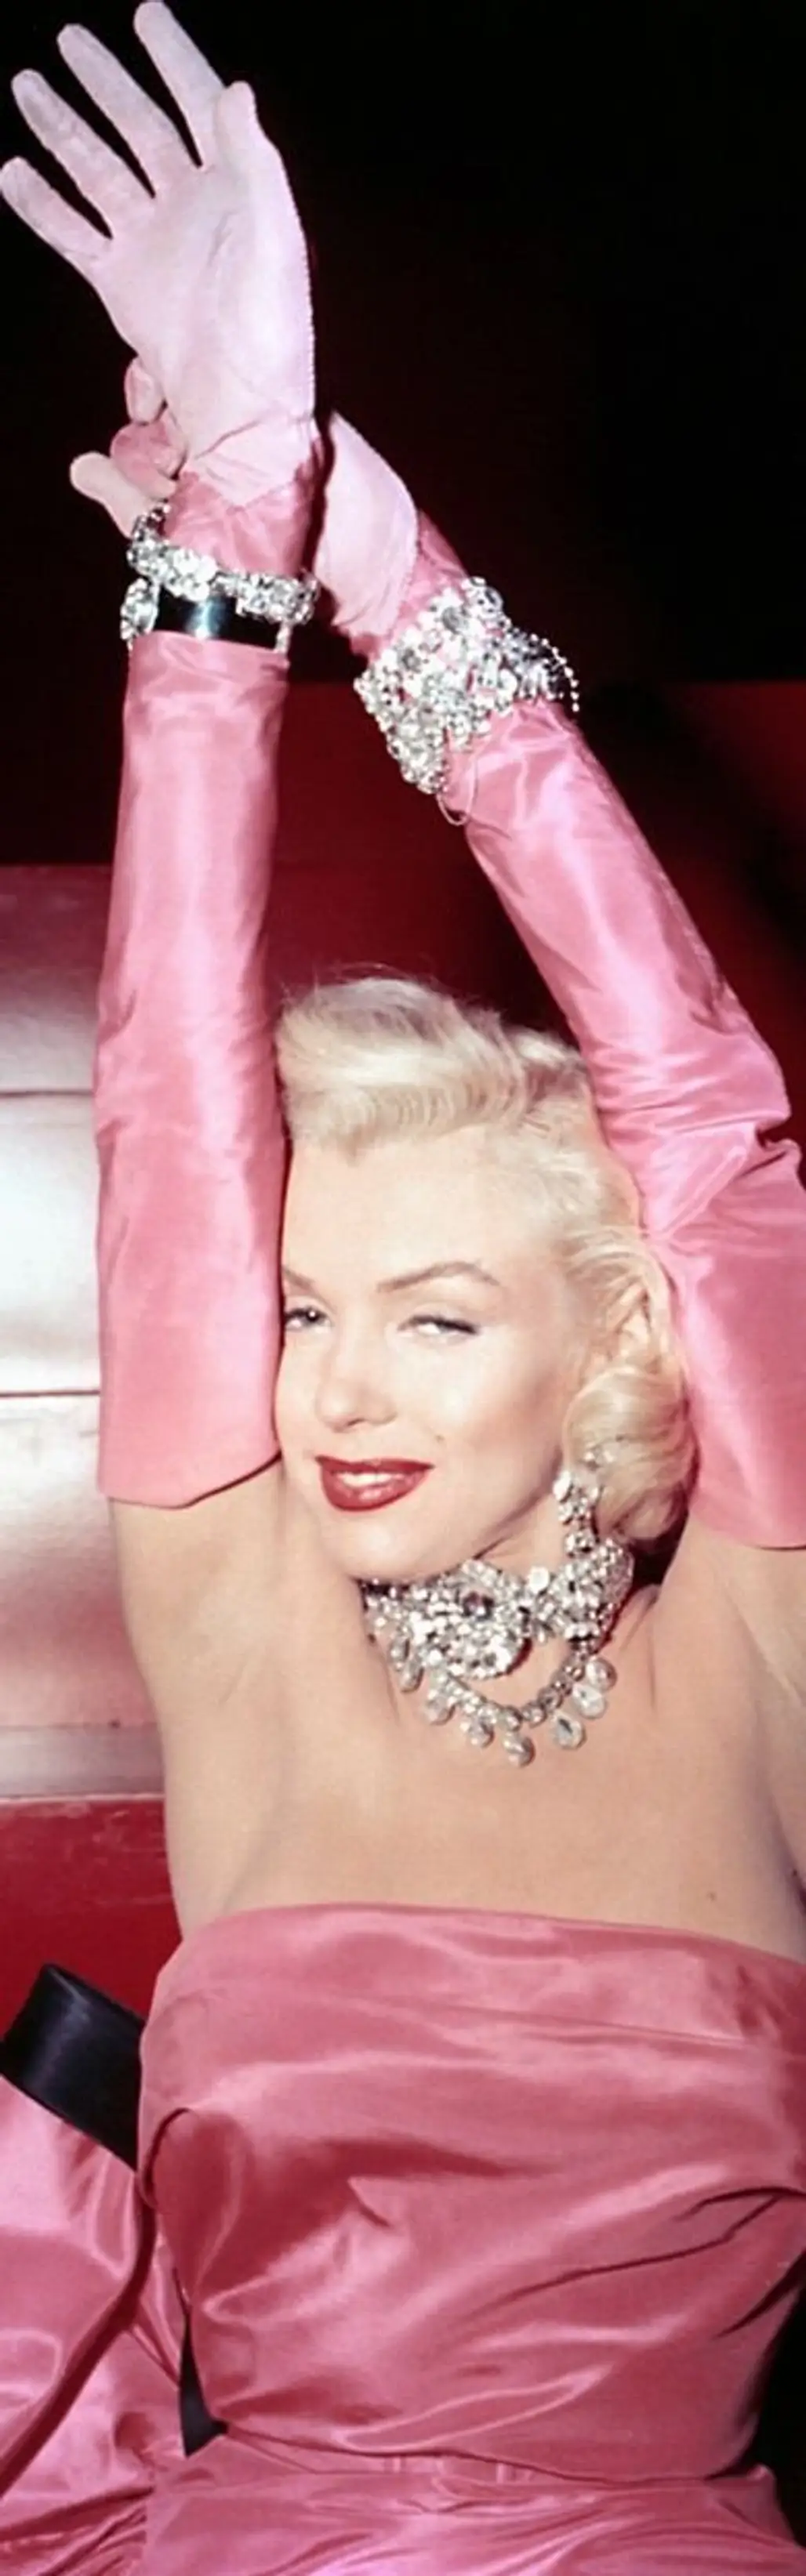 Marilyn Monroe Always Knew How to Wear Her Clothes